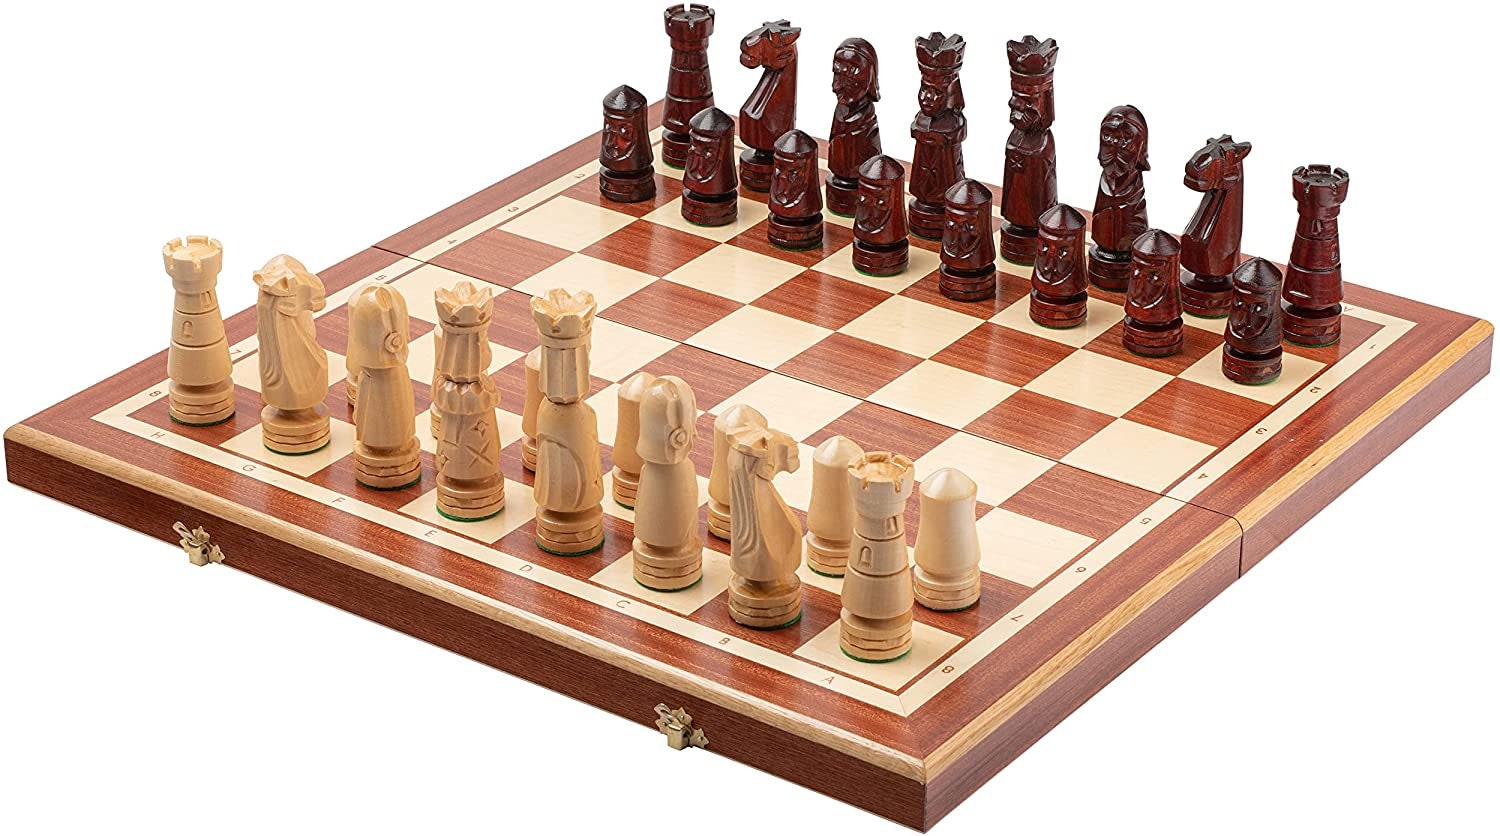 Wooden Chess Set | Master of Chess Set Pearl L Brown | Chess Board 35cm |  Classic Handmade Travel Chess Set for Adults and Kids